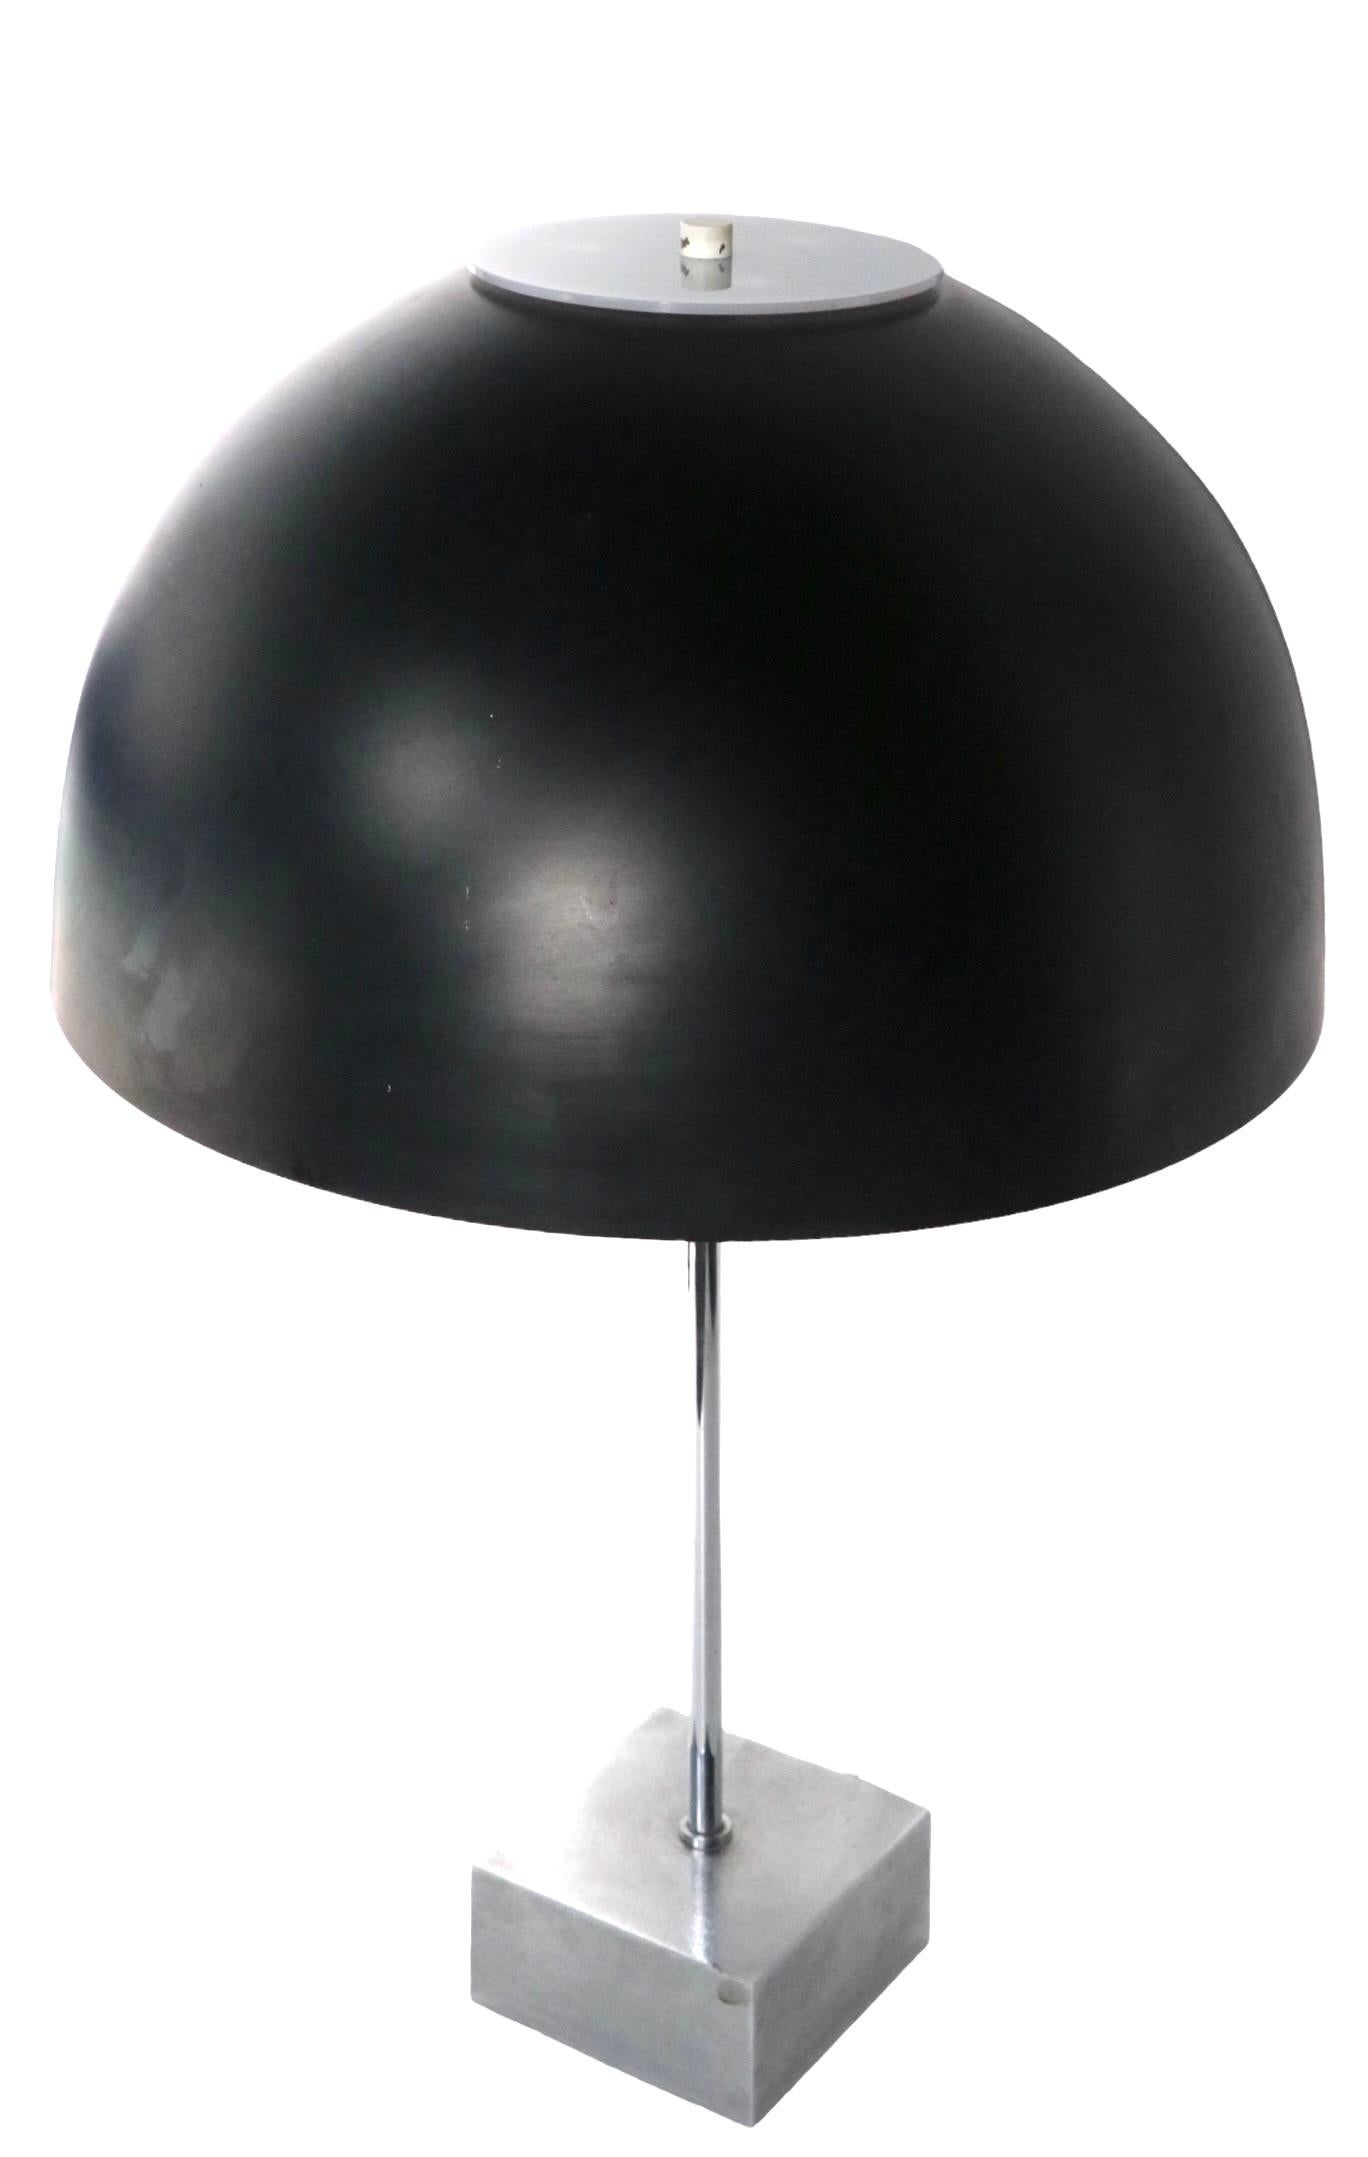 Classic Mod design table lamp designed by Paul Mayer for Habitat. The lamp features a black dome shade with a chrome base. The lamp accepts two standard size screw in bulbs, and still retains it’s original Habitat label at the top sockets. This